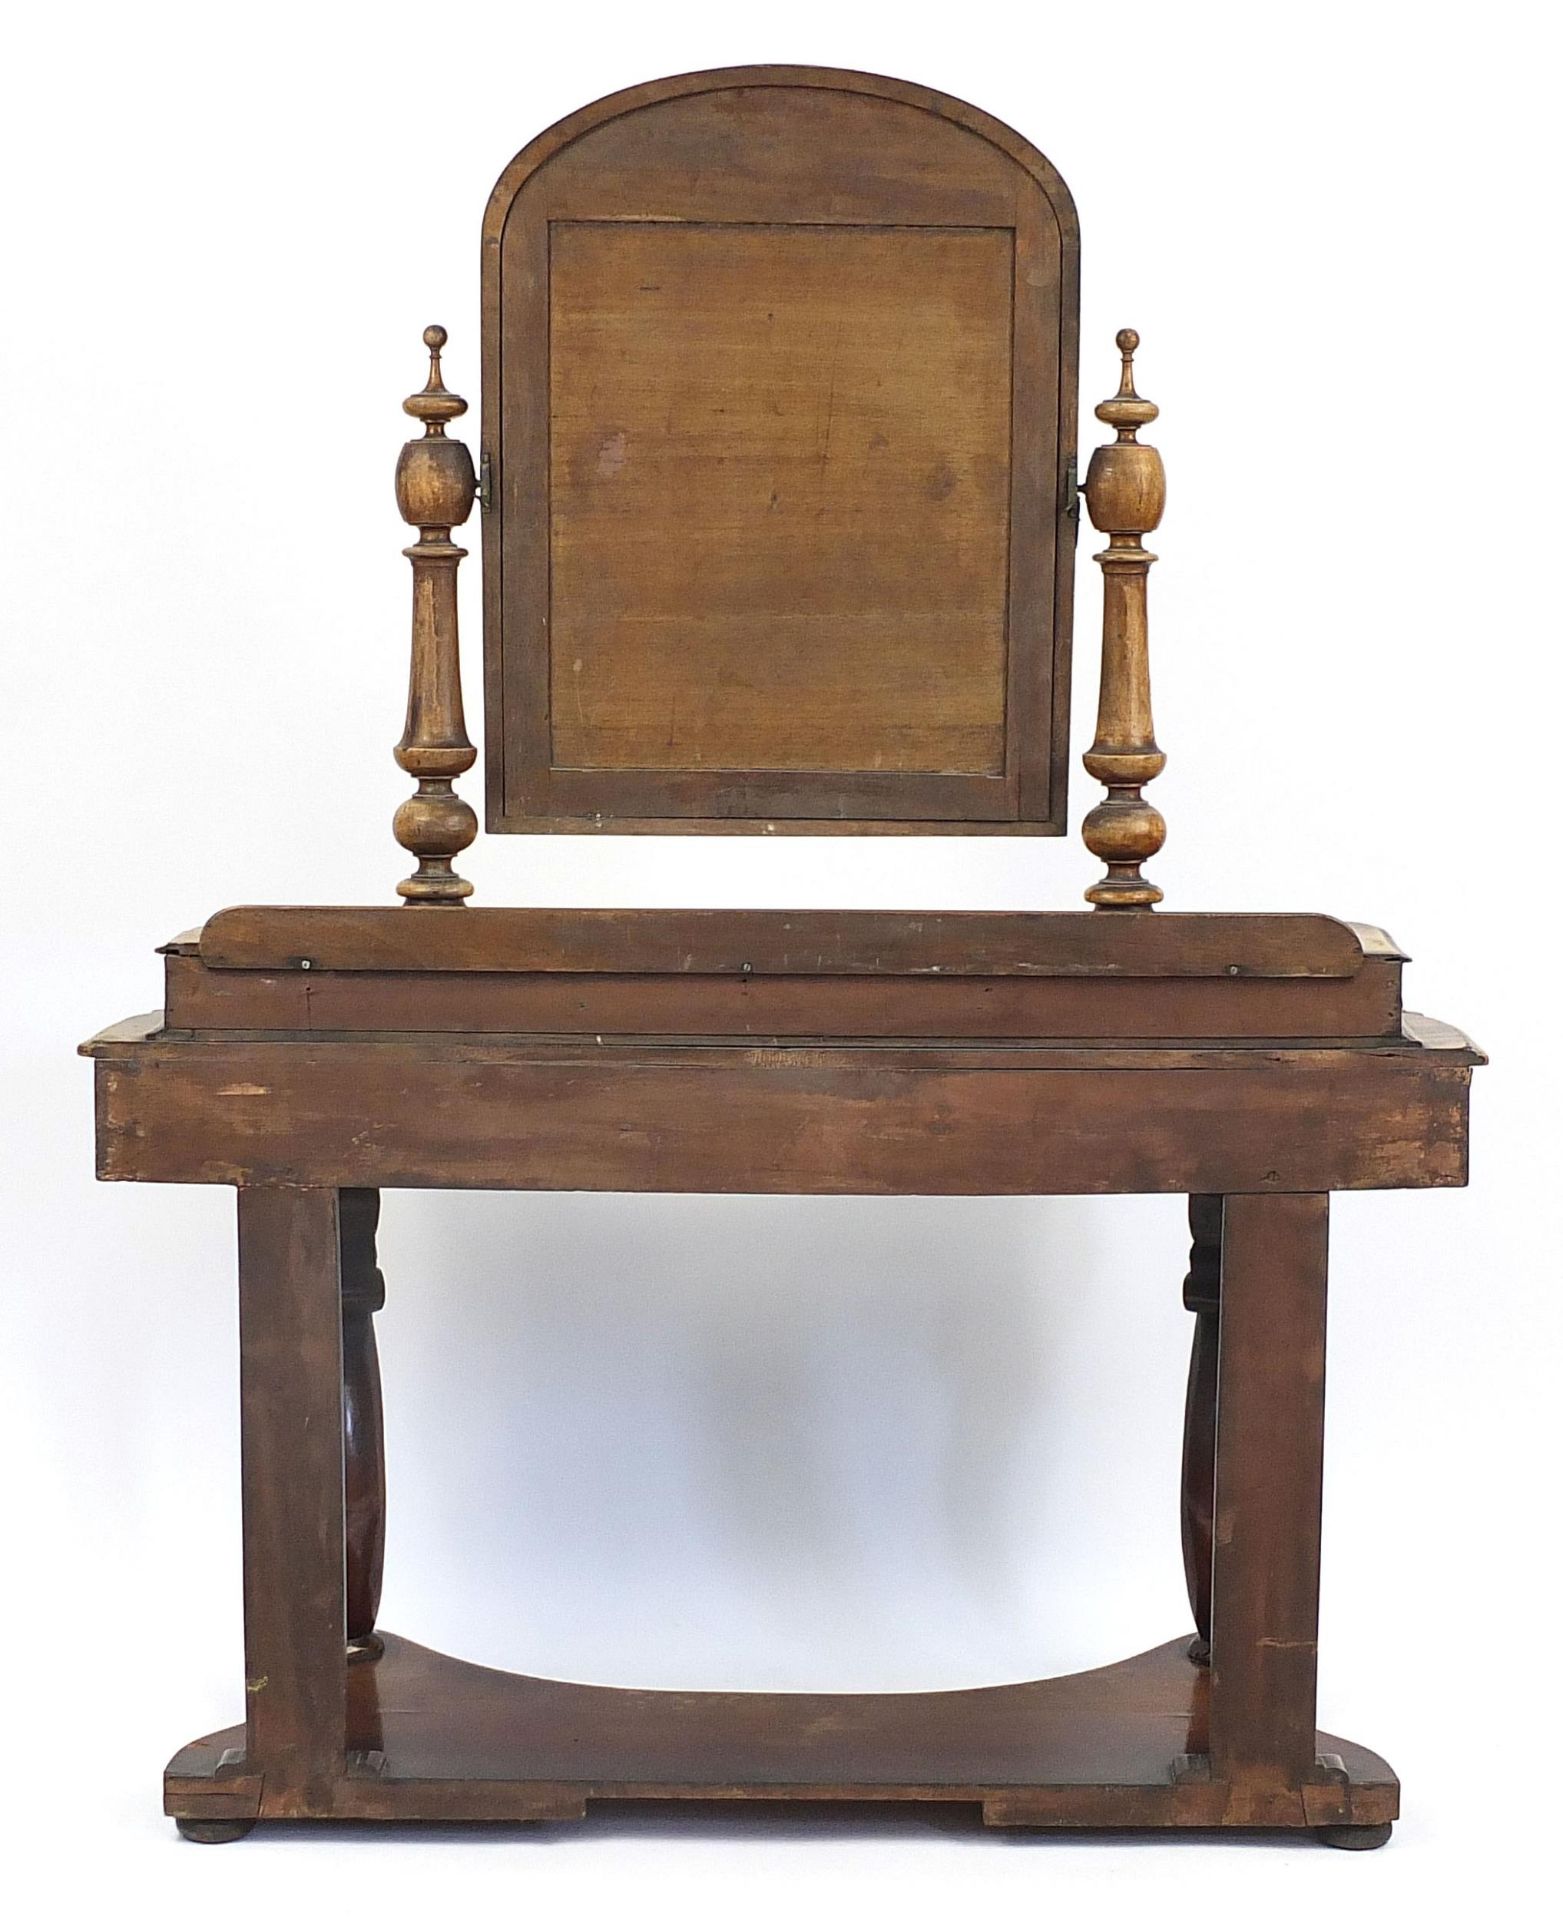 Victorian mahogany Duchess dressing table with swing mirror, 155cm H x 120cm W x 53cm D - Image 5 of 5